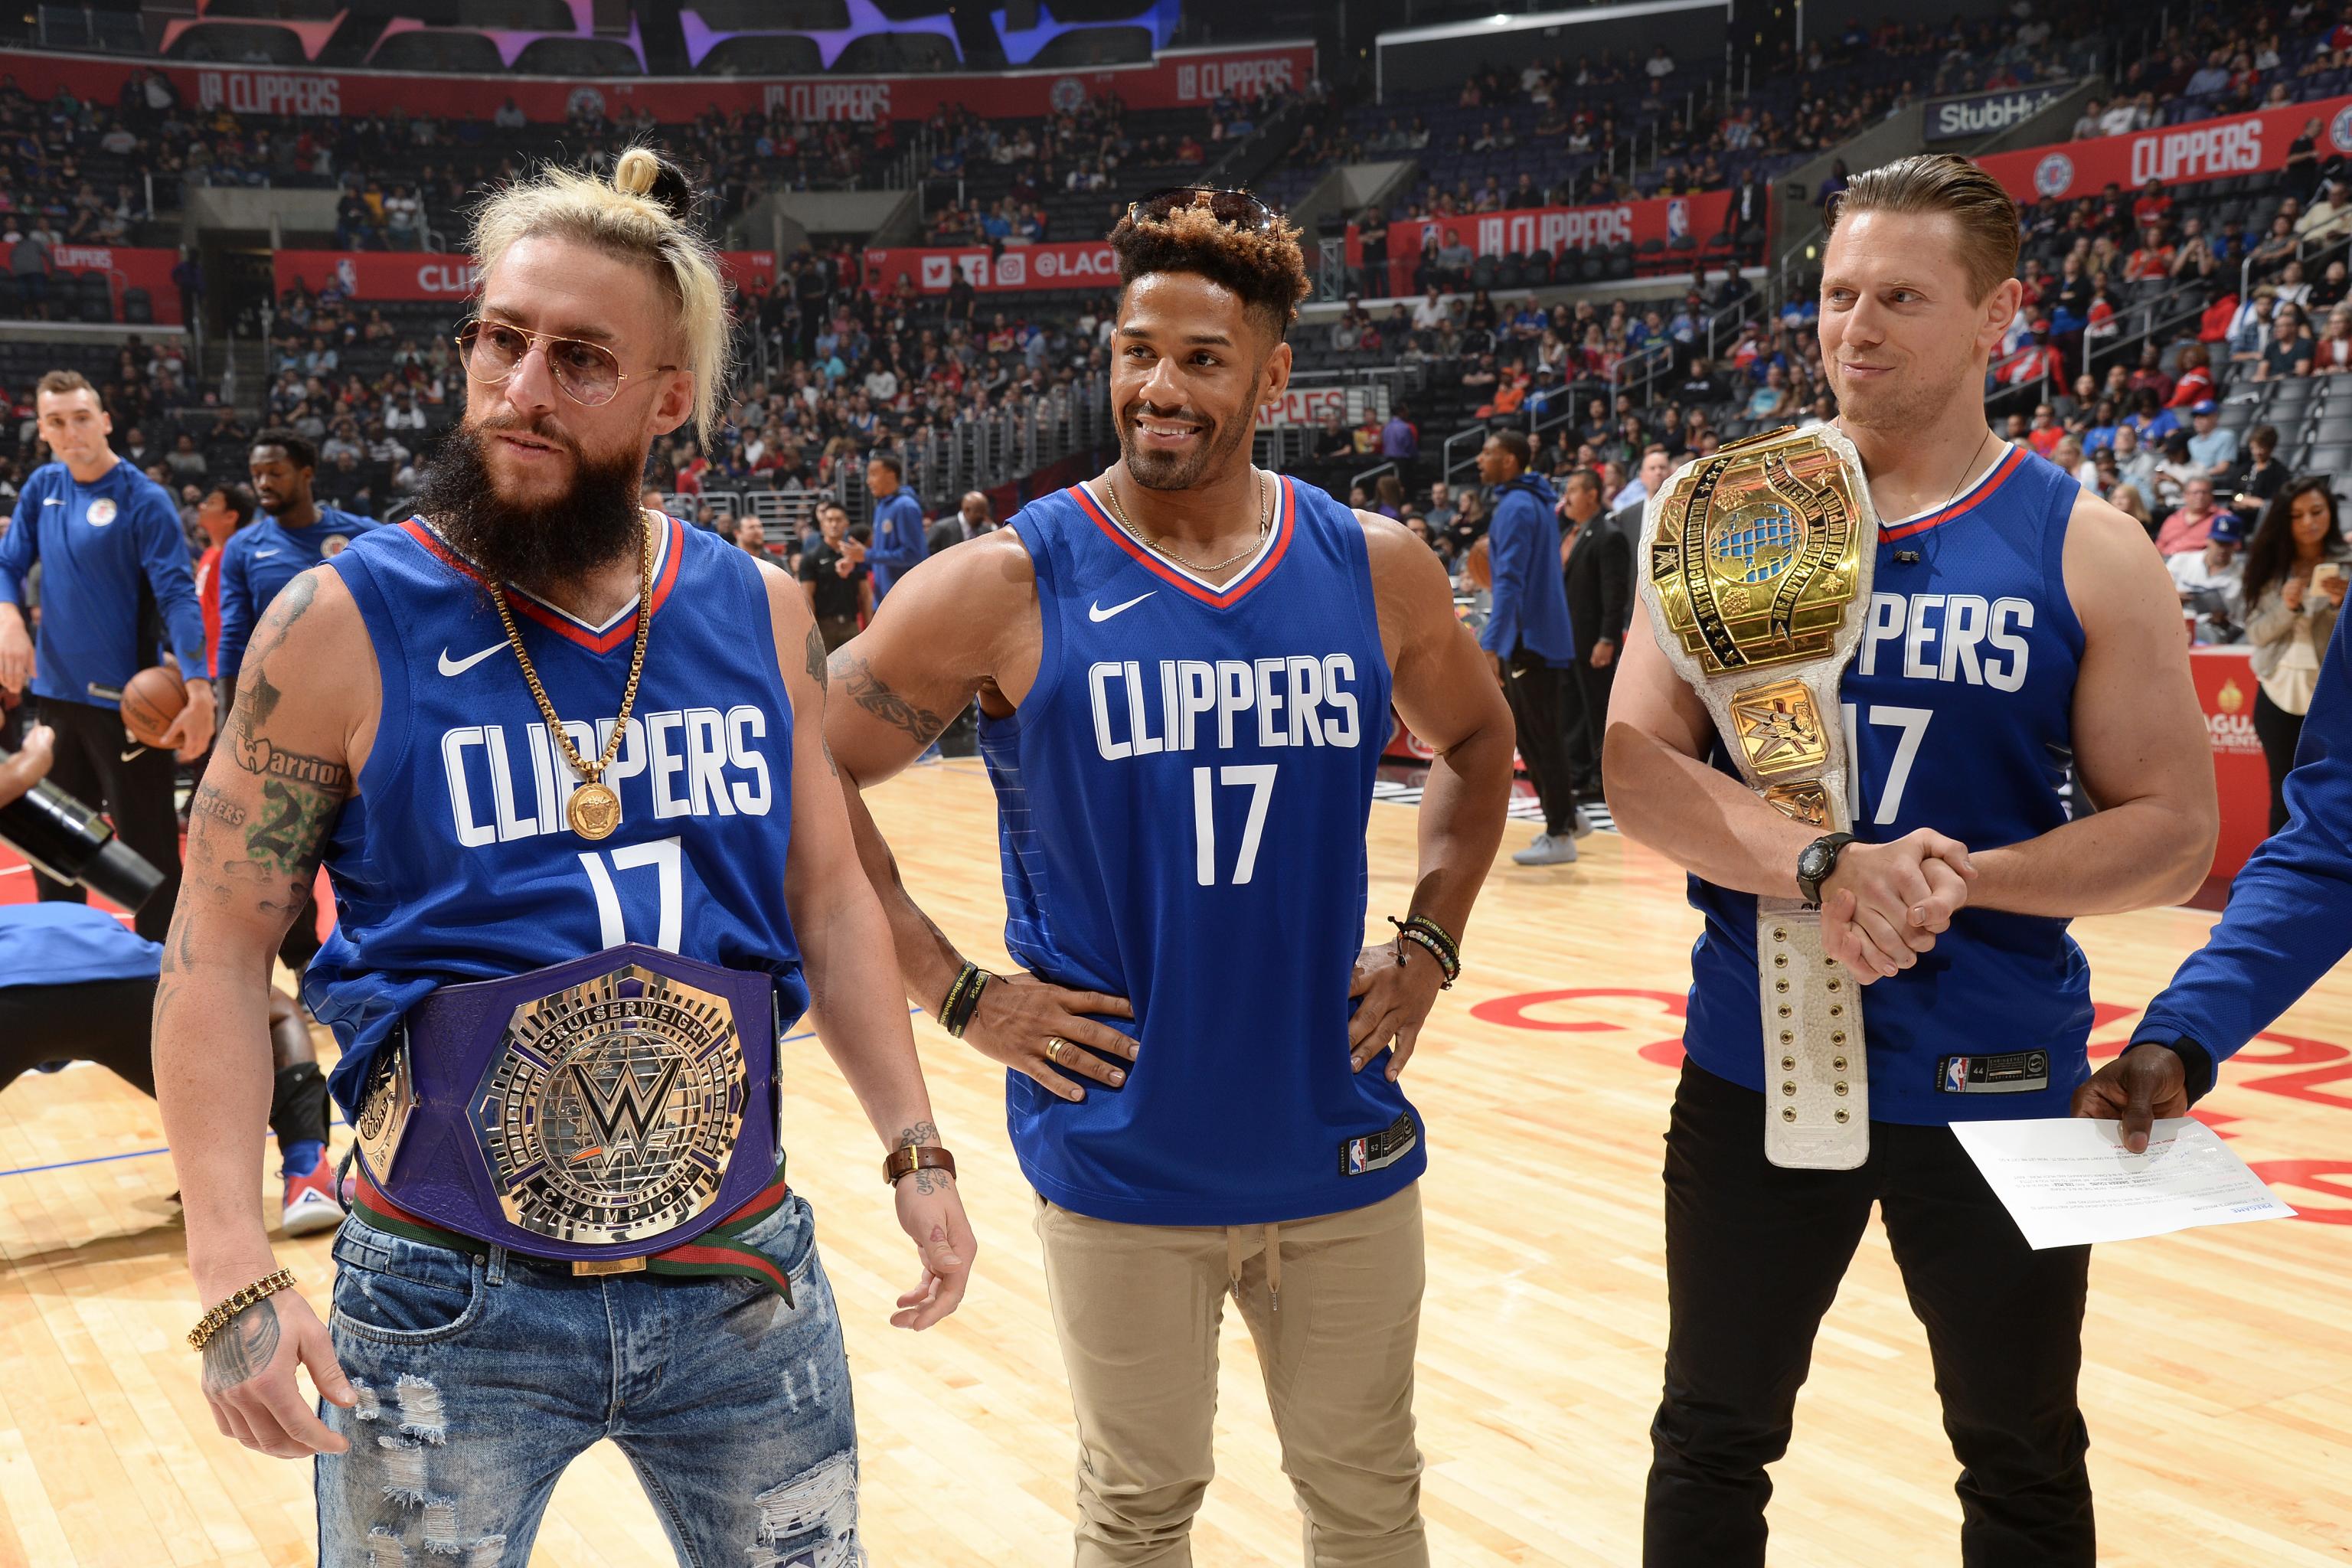 Ex Wwe Star Enzo Amore Says He Won T Wrestle Again Not In A Million Years Bleacher Report Latest News Videos And Highlights